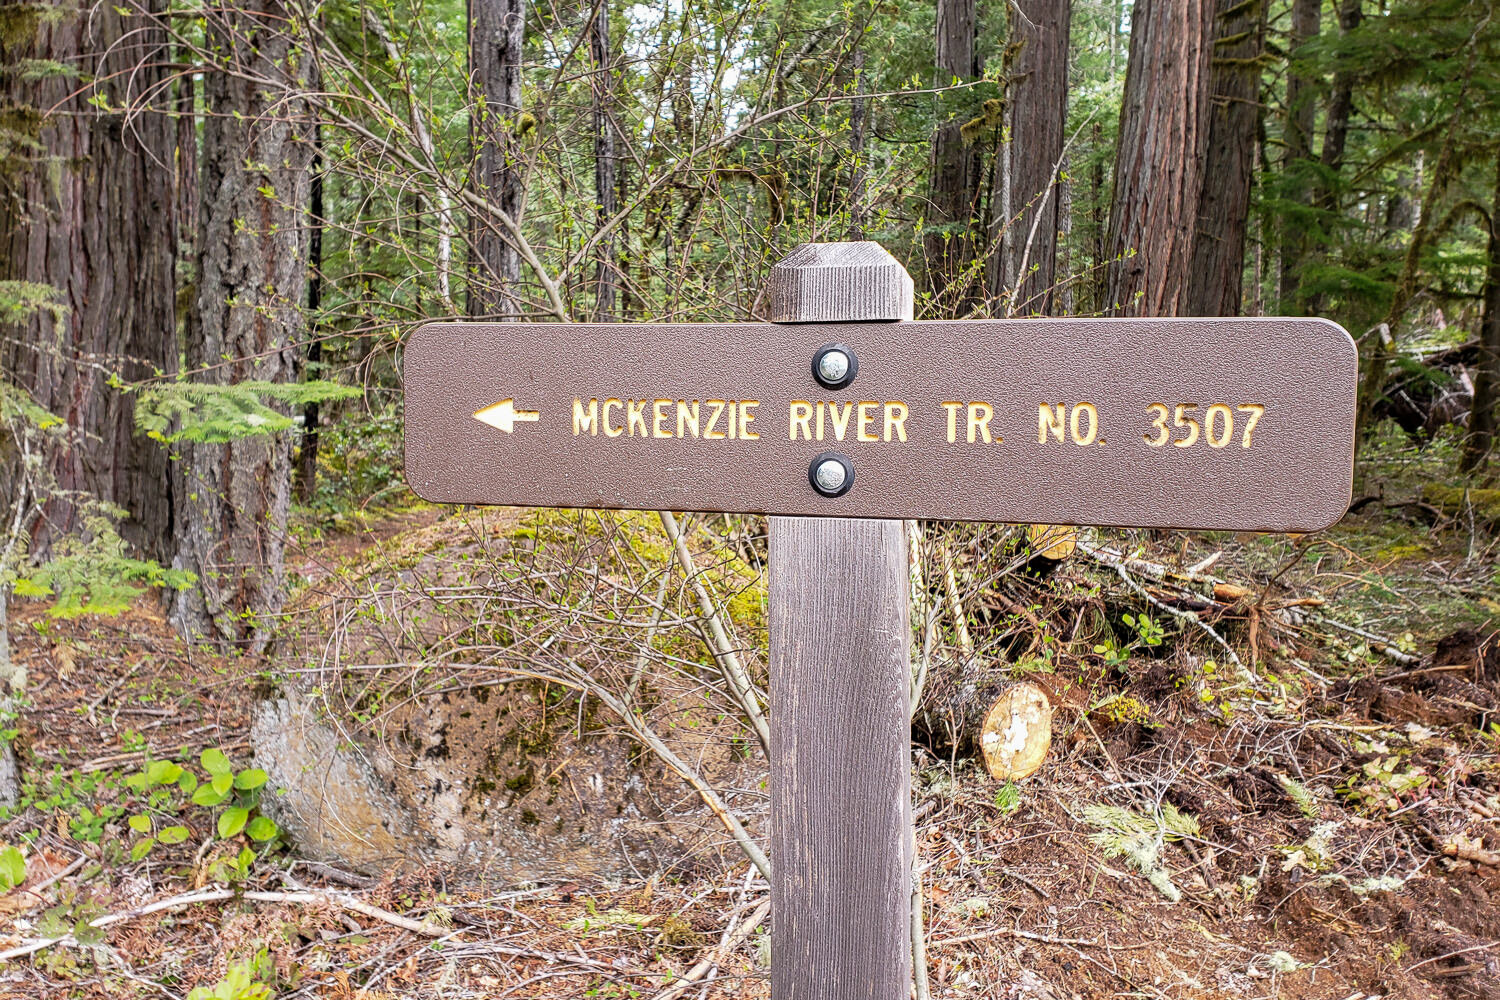 The McKenzie River Trail is very well maintained & it has excellent signage that’s easy to follow.